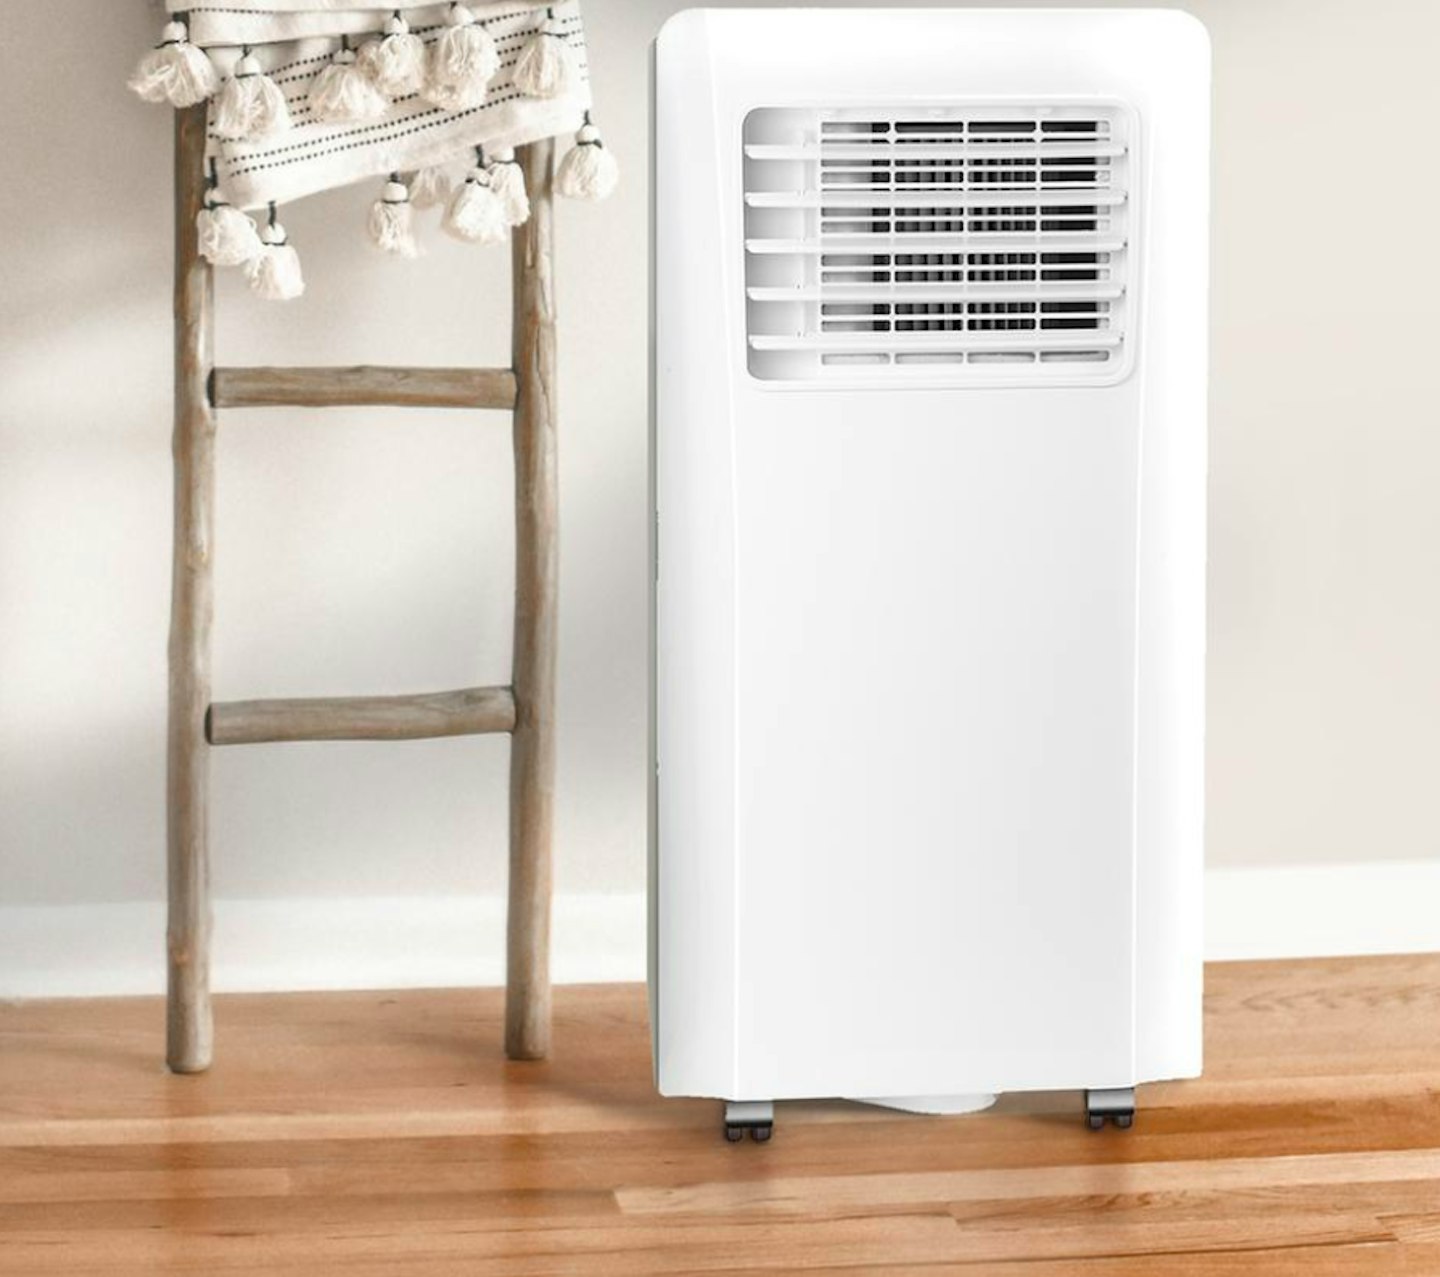 550., 780W or 990W Davis and Grant Air Conditioner, starting at 134.99